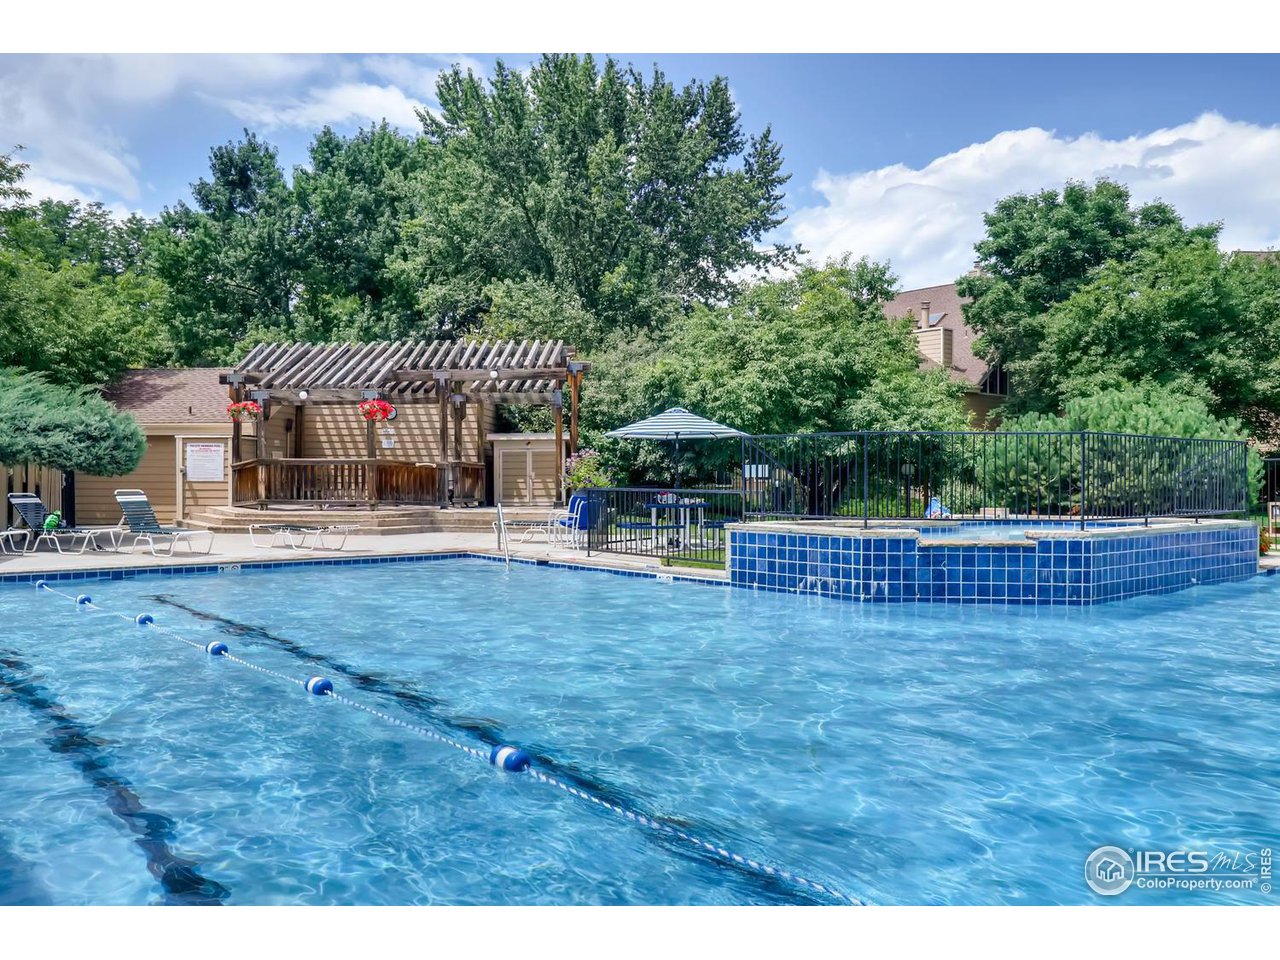 Sparkling Pool. Great for morning/afternoon lap swimming or just hanging out with friends and neighbors.Open longer than the typical pool season.